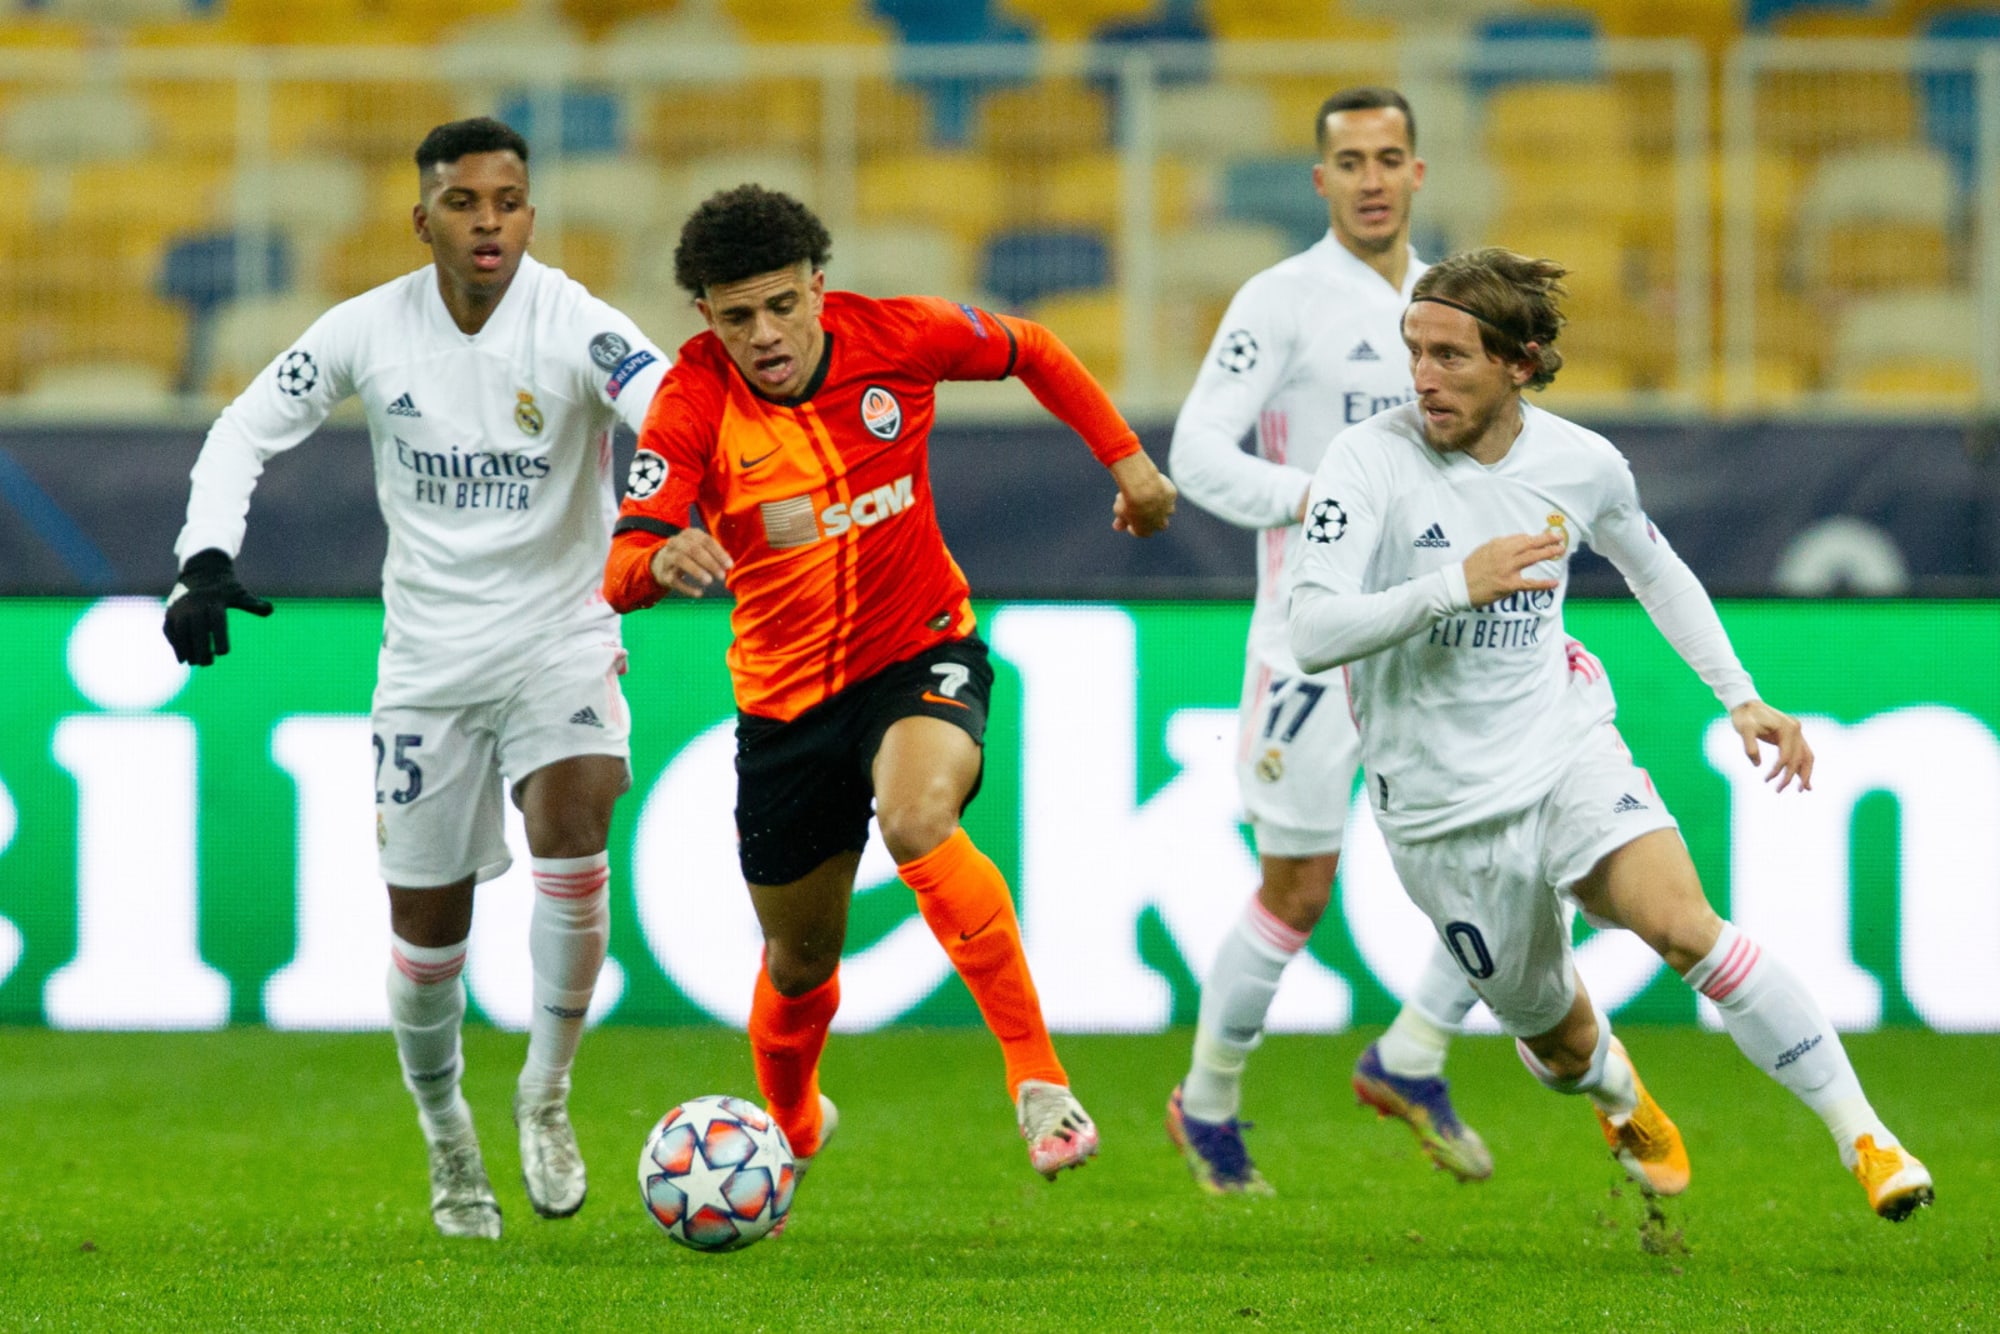 Real Madrid: Player Ratings for the 2-0 loss against Shakhtar Donetsk